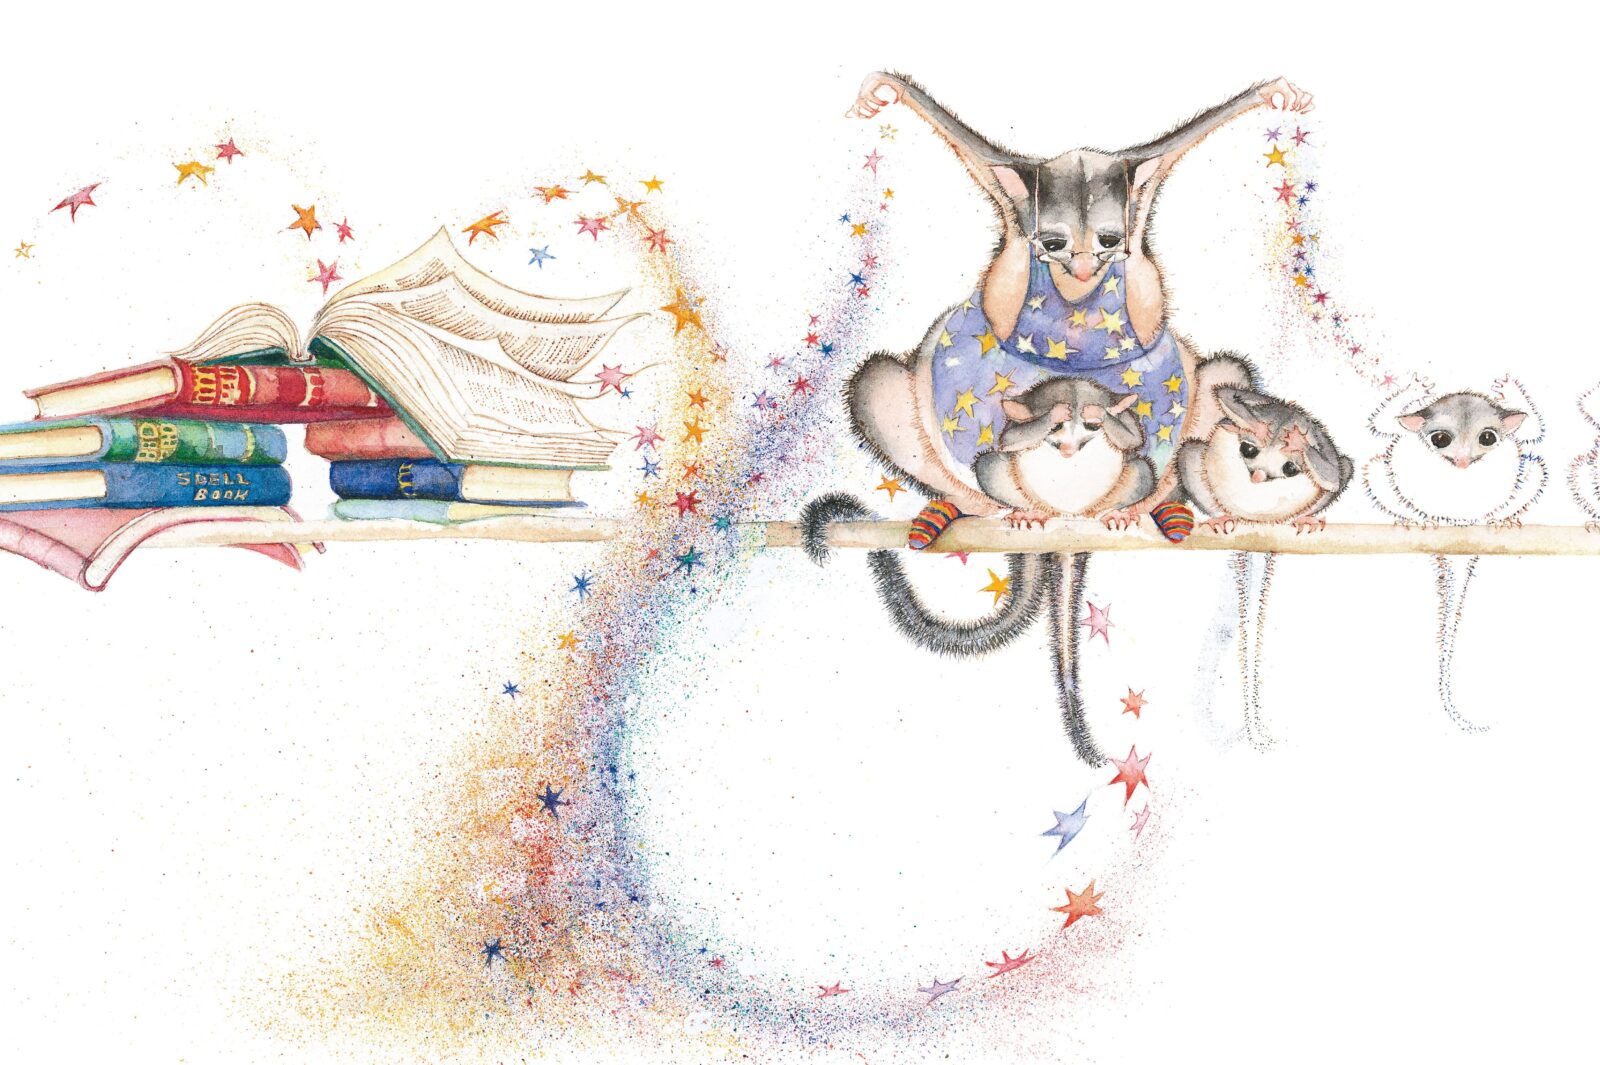 Illustration of a possum in an apron sprinkling magic over a small possum who is becoming invisible